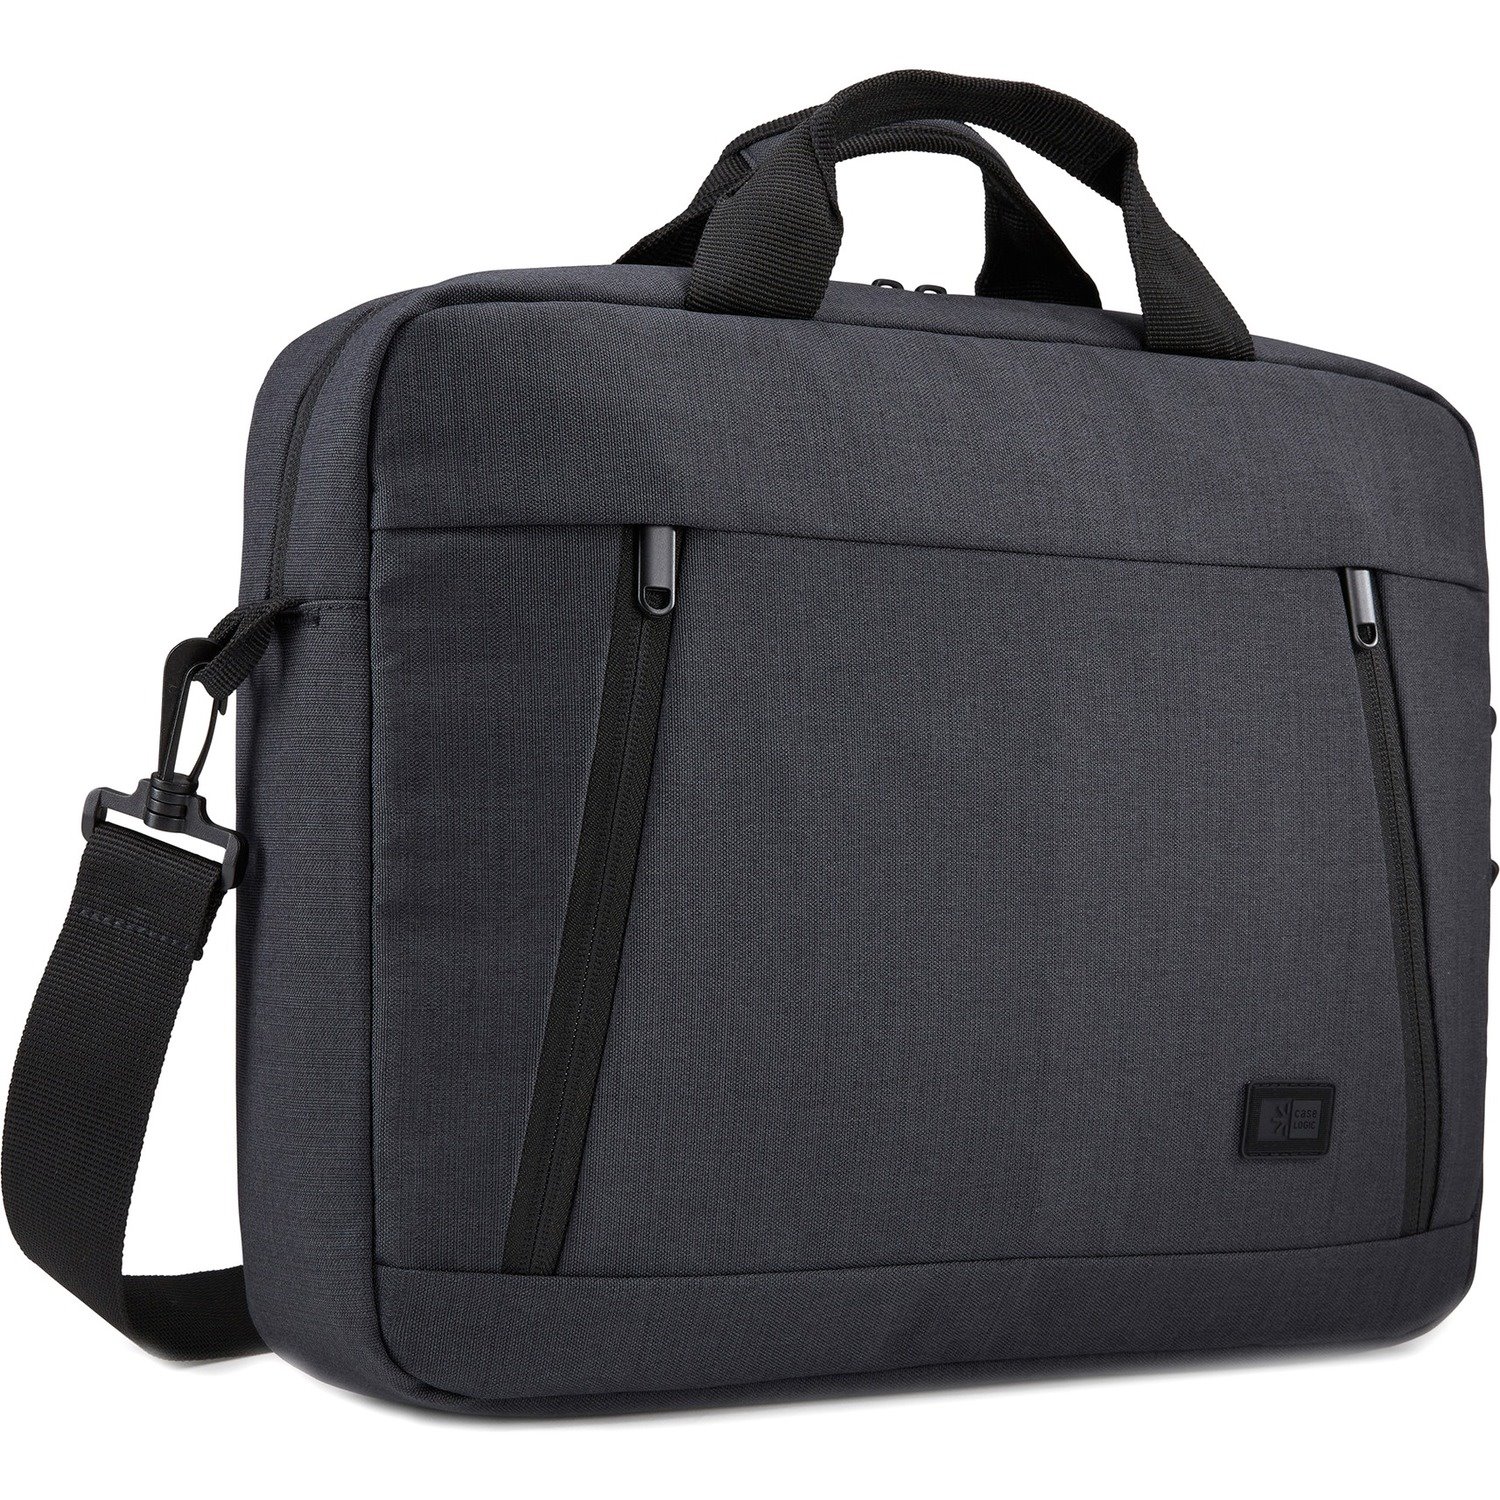 Case Logic Huxton Carrying Case (Attach&eacute;) for 25.4 cm (10") to 35.6 cm (14") Notebook - Black